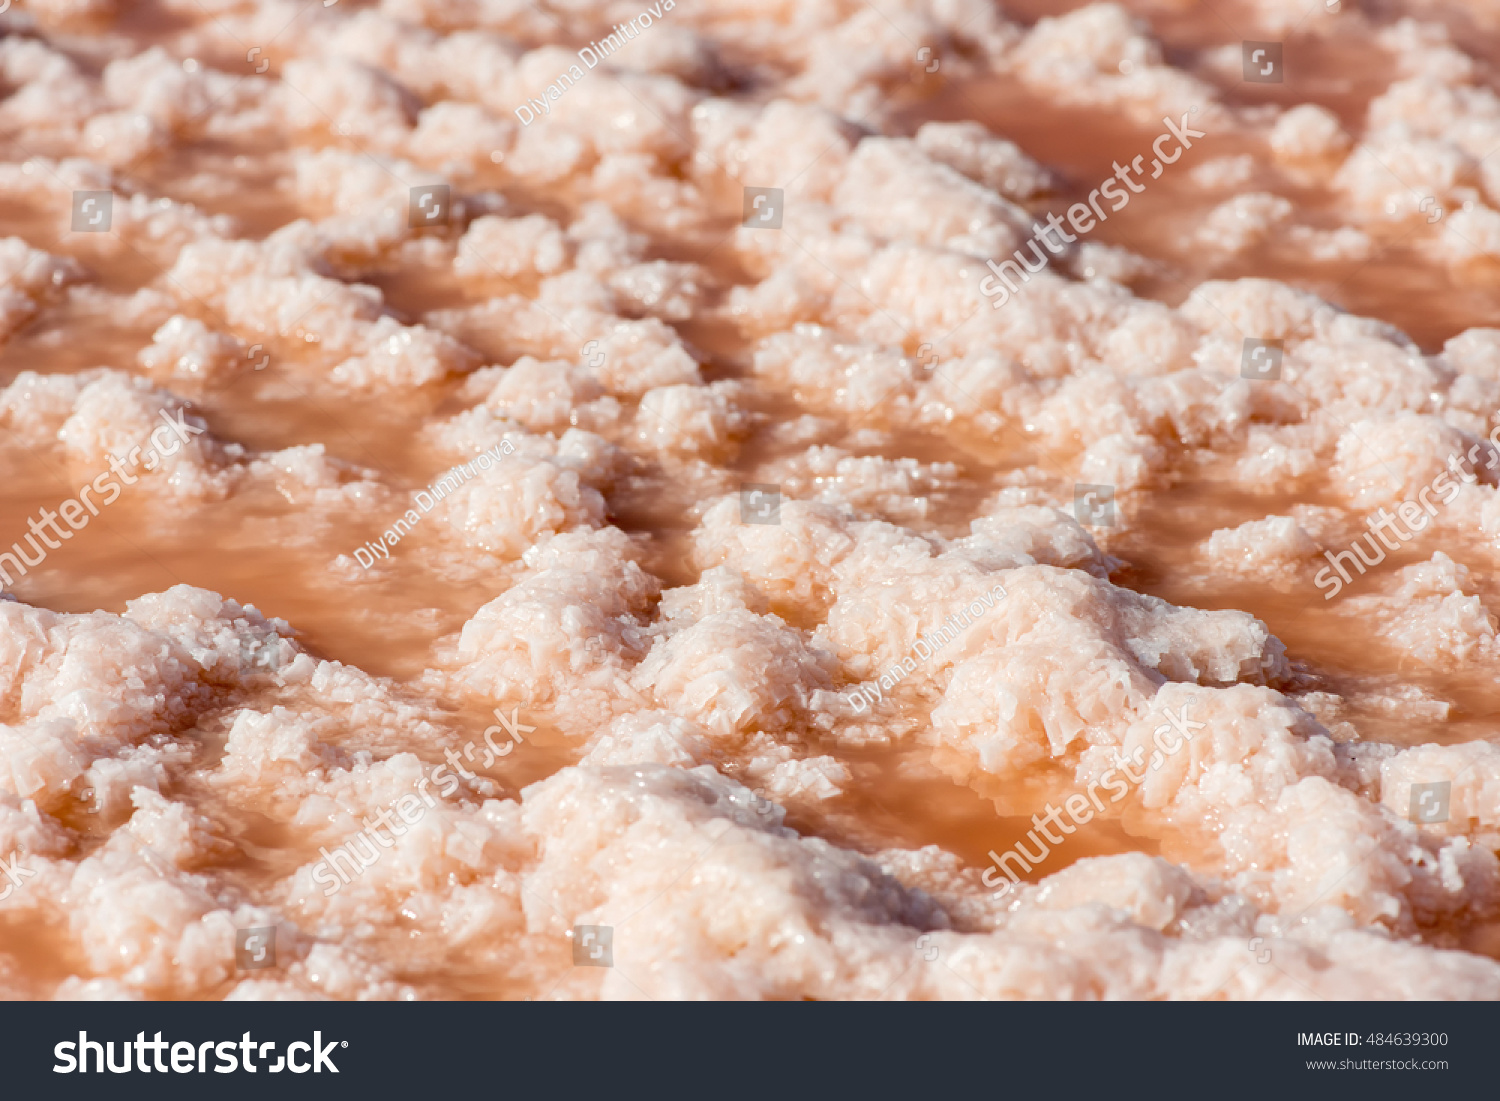 Salt formations in a dried lake of the saltworks near Burgas, Bulgaria, Eastern Europe - selective focus, copy space #484639300